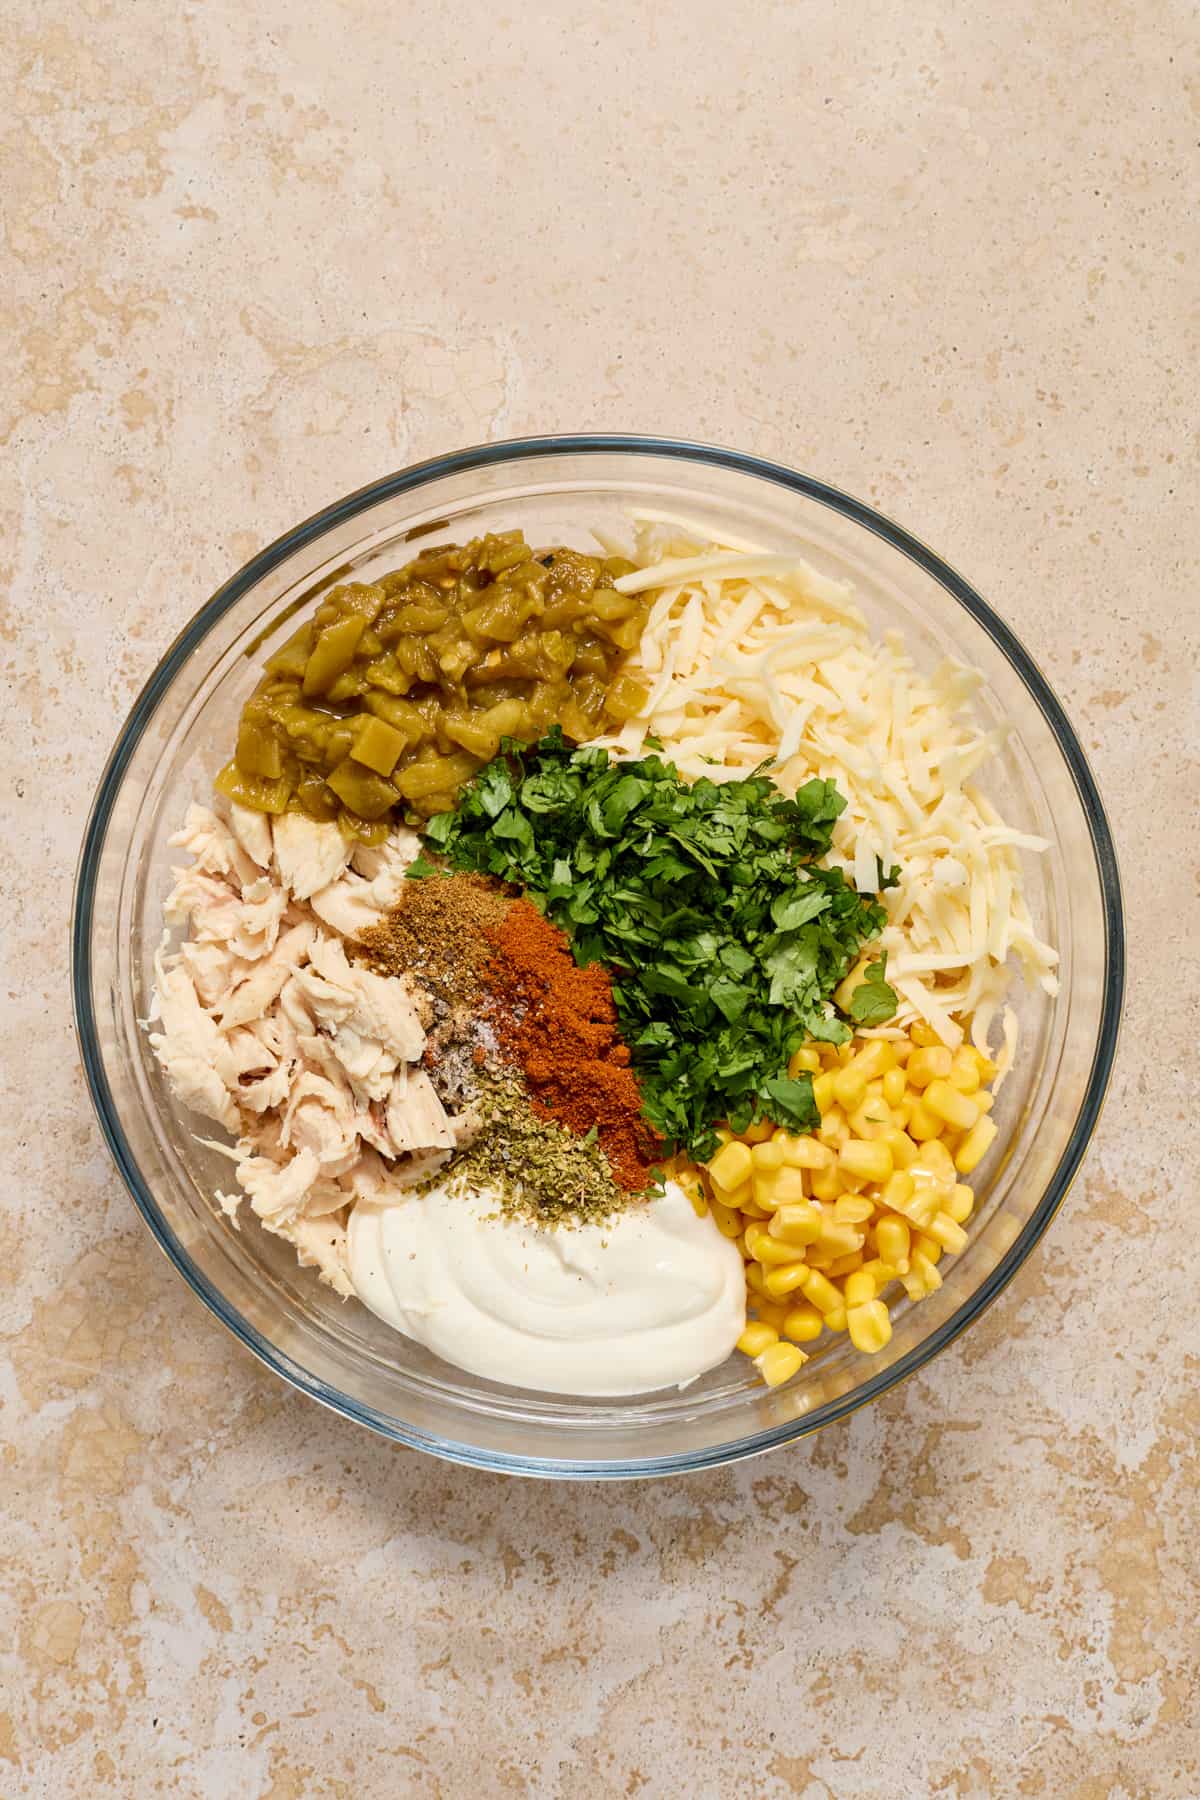 Chicken, cilantro, corn, spices, sour cream, cheese and other ingredients for chicken enchiladas in bowl.